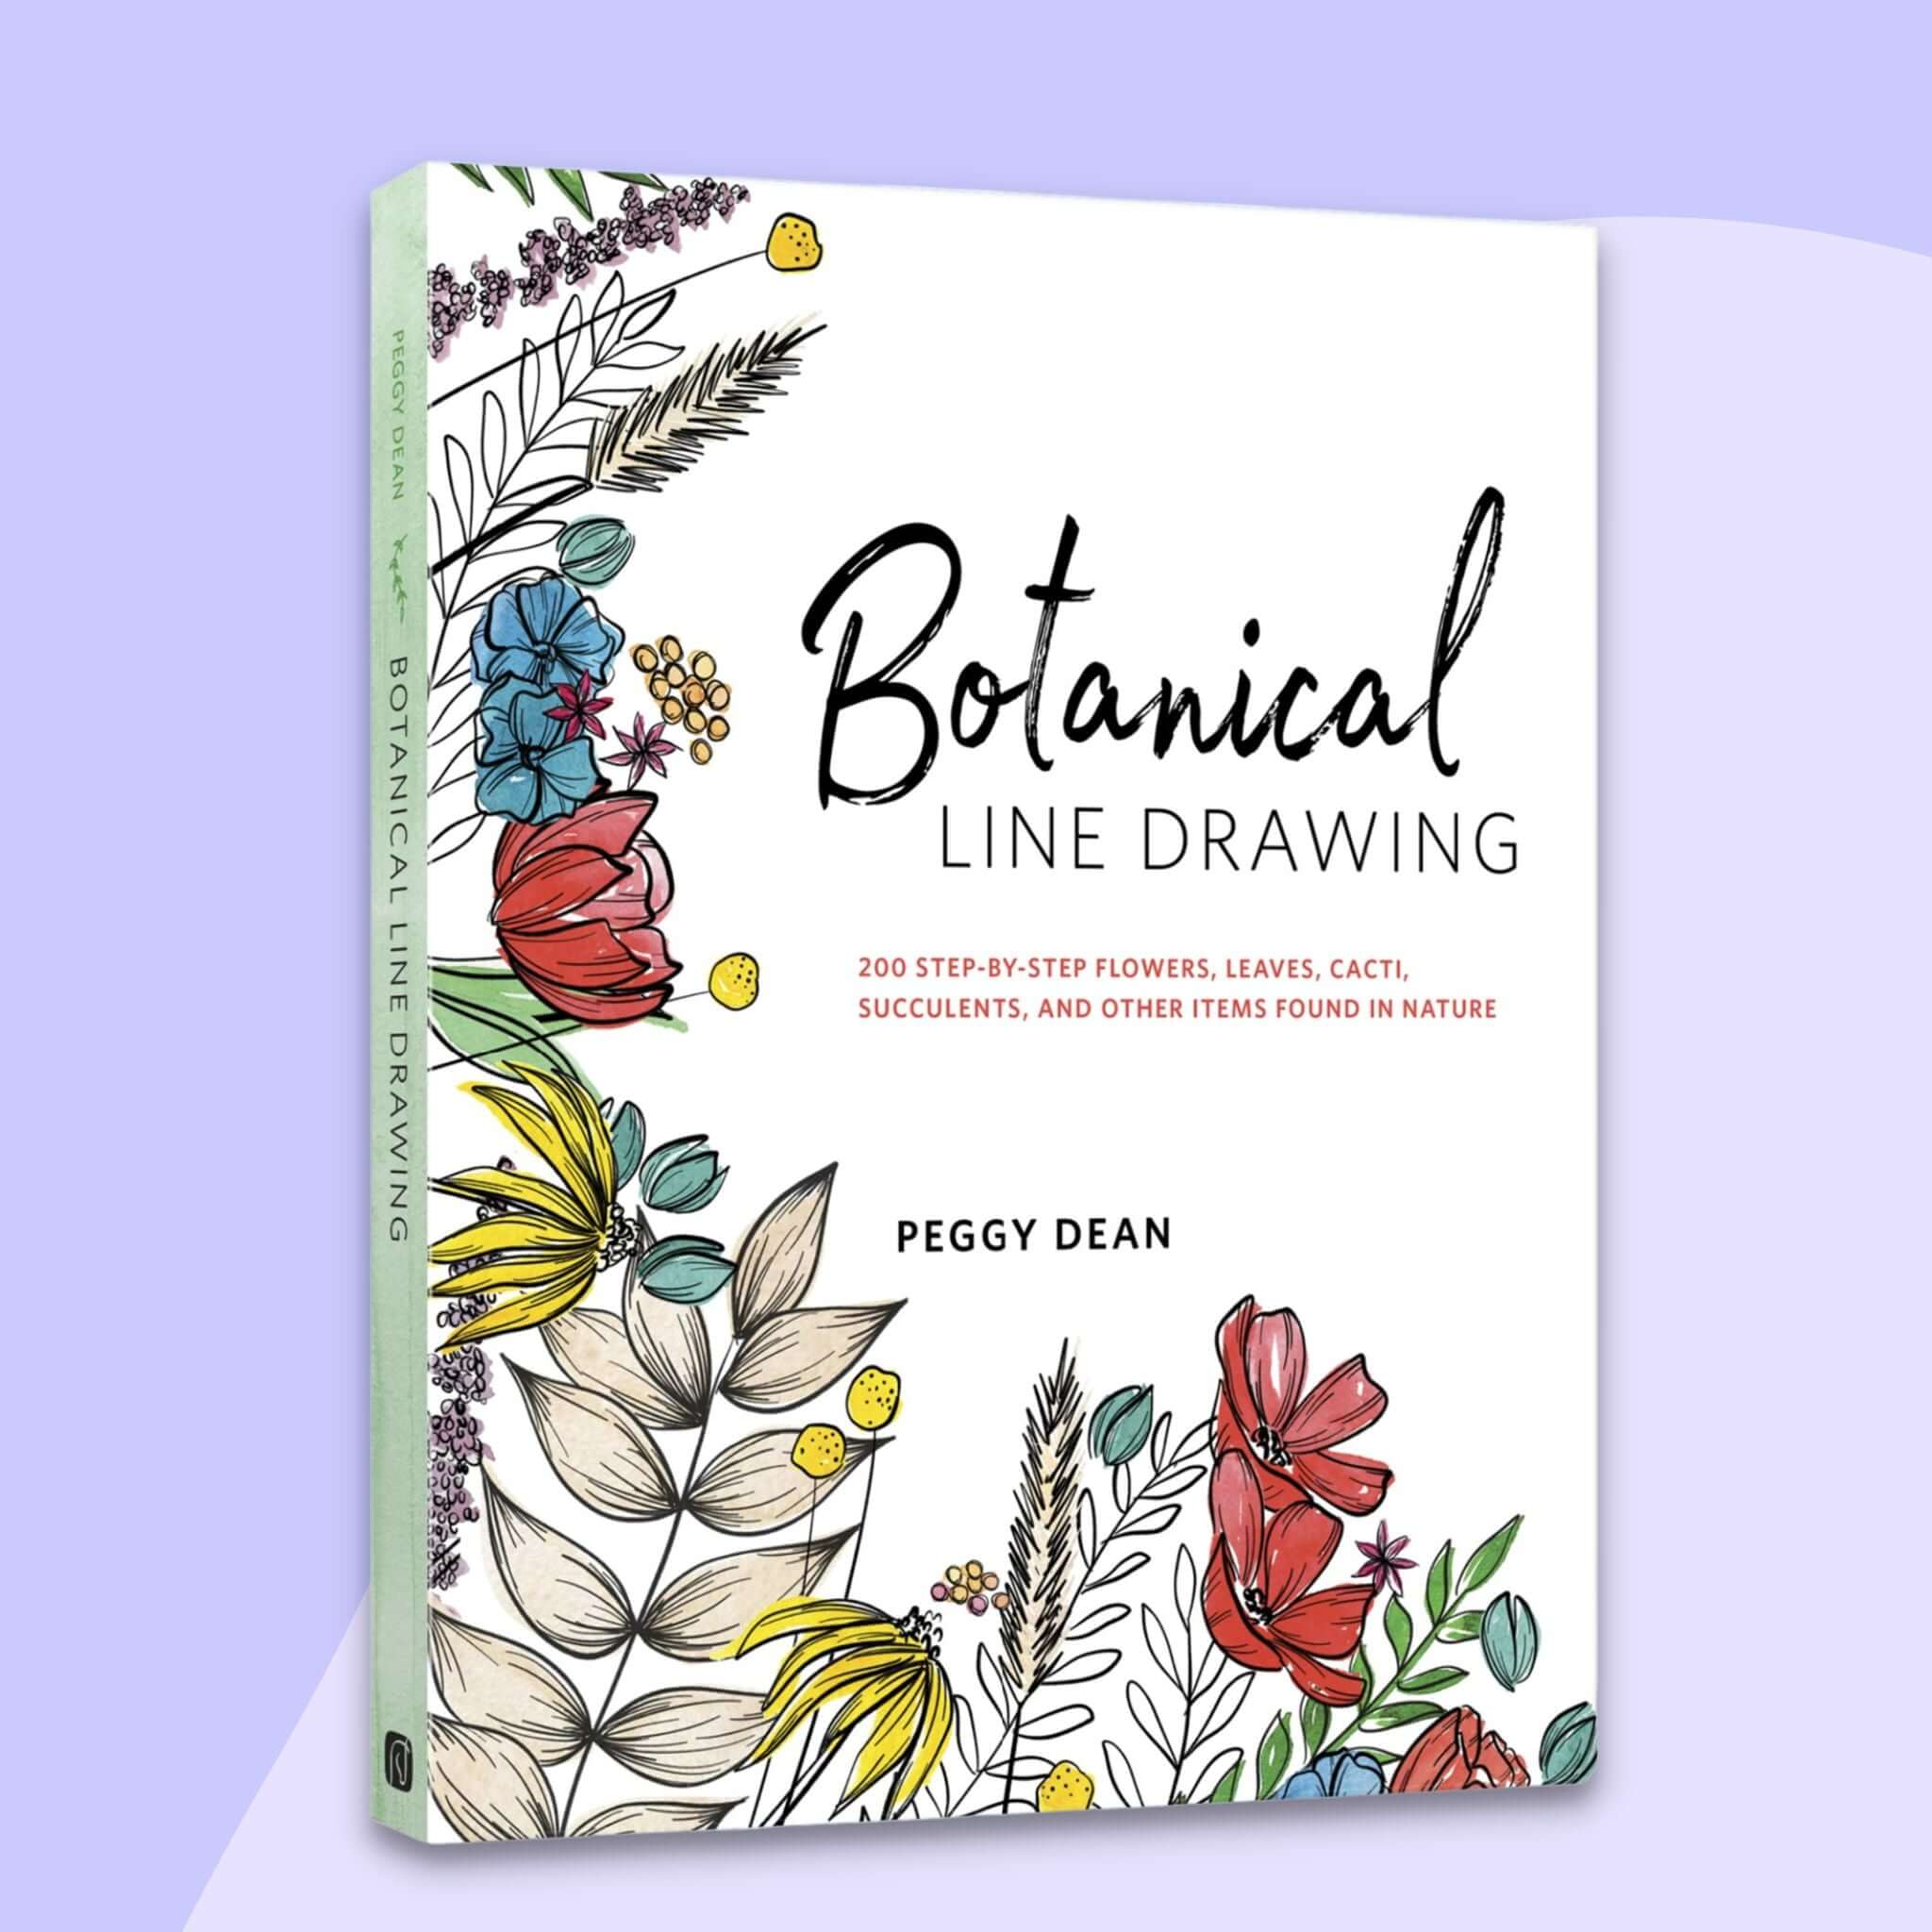 Step-by-step botanical line drawing book